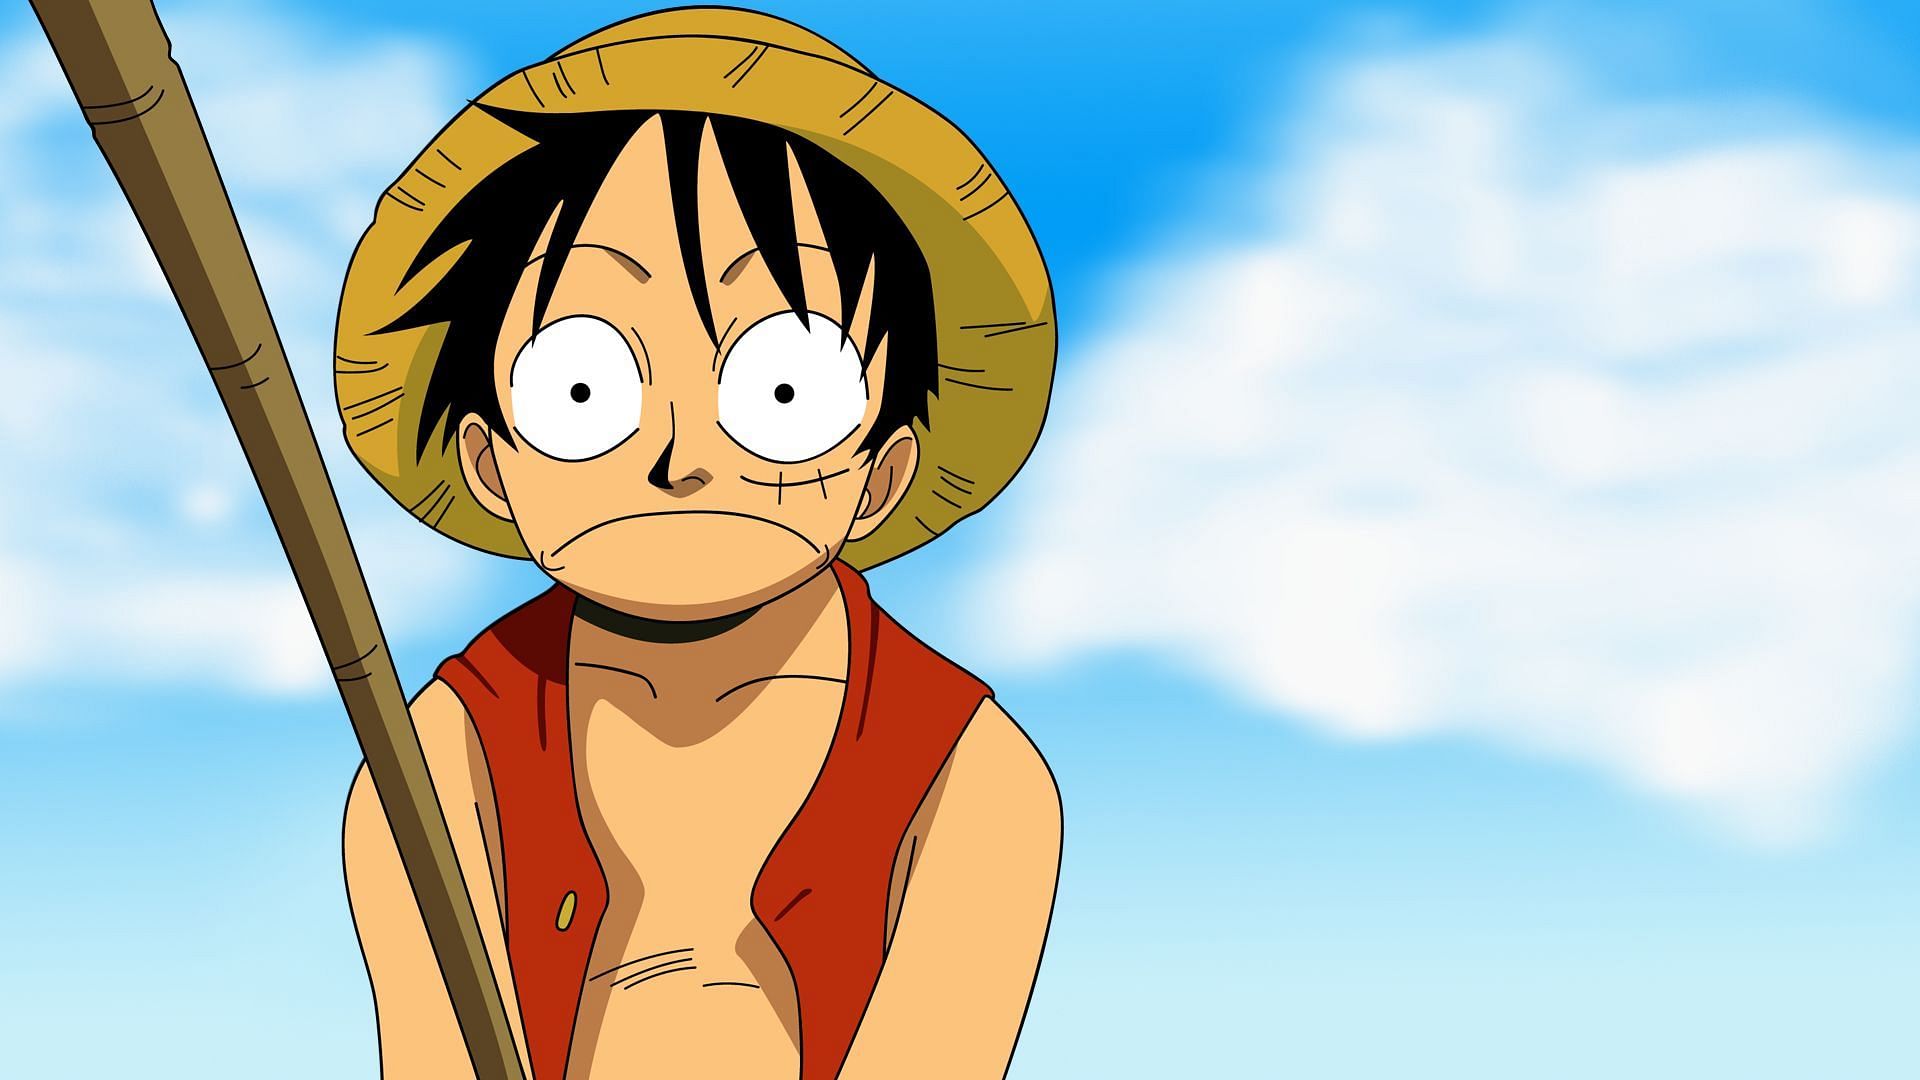 The 'One Piece' Episodes Where Luffy Gets Each of His Gears, Explained